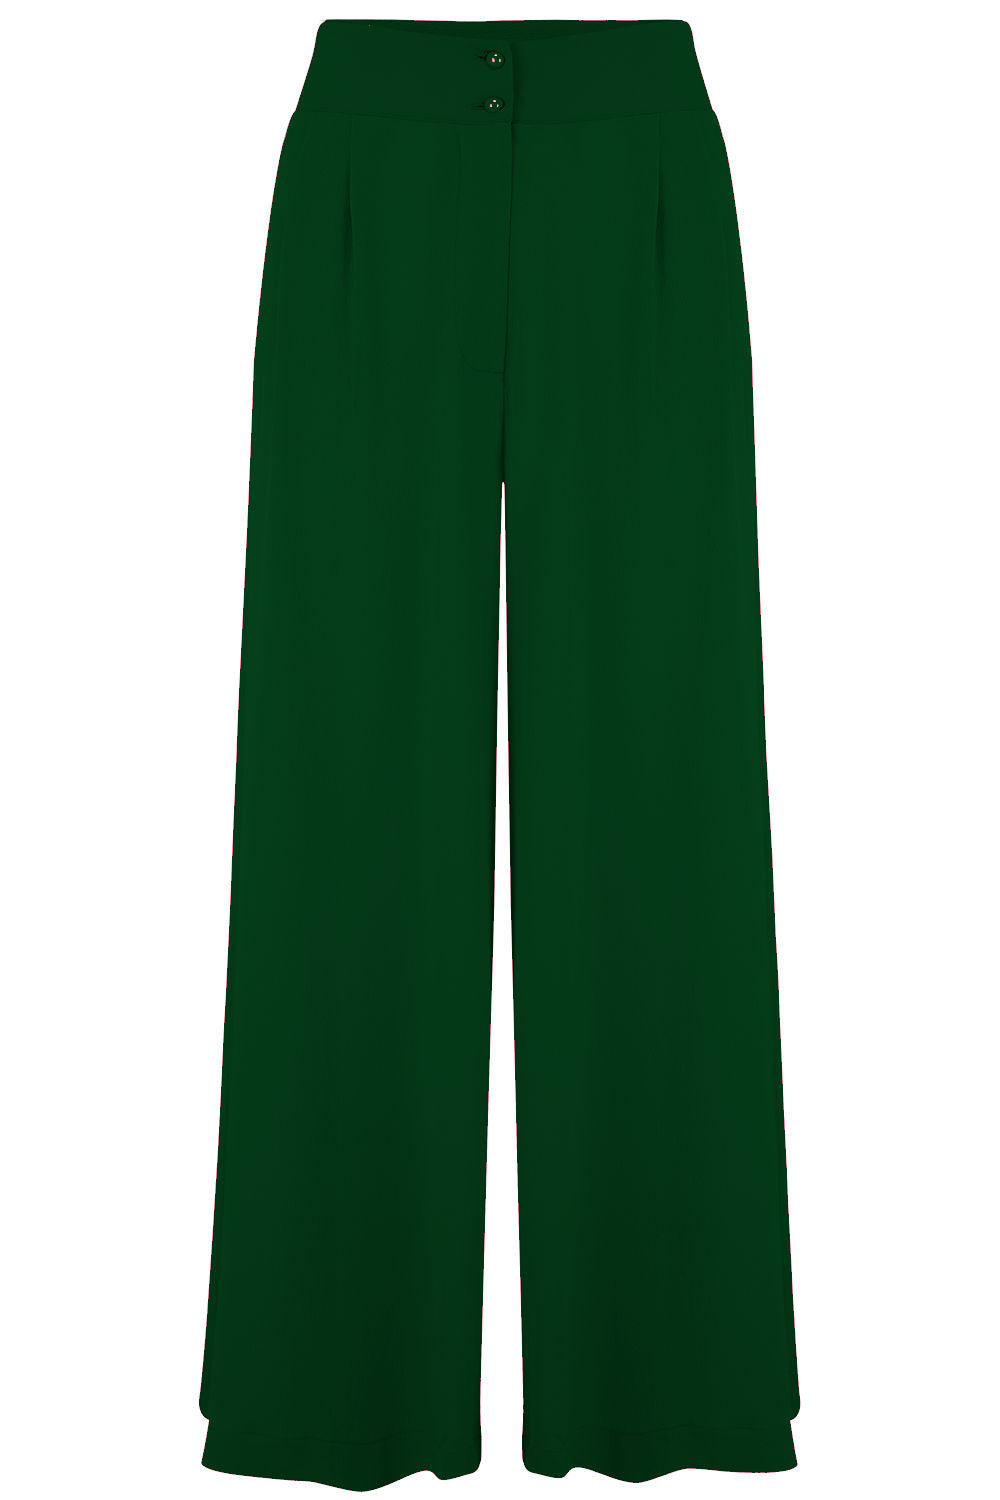 The "Sophia" Palazzo Wide Leg Trousers in Green, Easy To Wear Vintage Inspired Style - True and authentic vintage style clothing, inspired by the Classic styles of CC41 , WW2 and the fun 1950s RocknRoll era, for everyday wear plus events like Goodwood Revival, Twinwood Festival and Viva Las Vegas Rockabilly Weekend Rock n Romance Rock n Romance